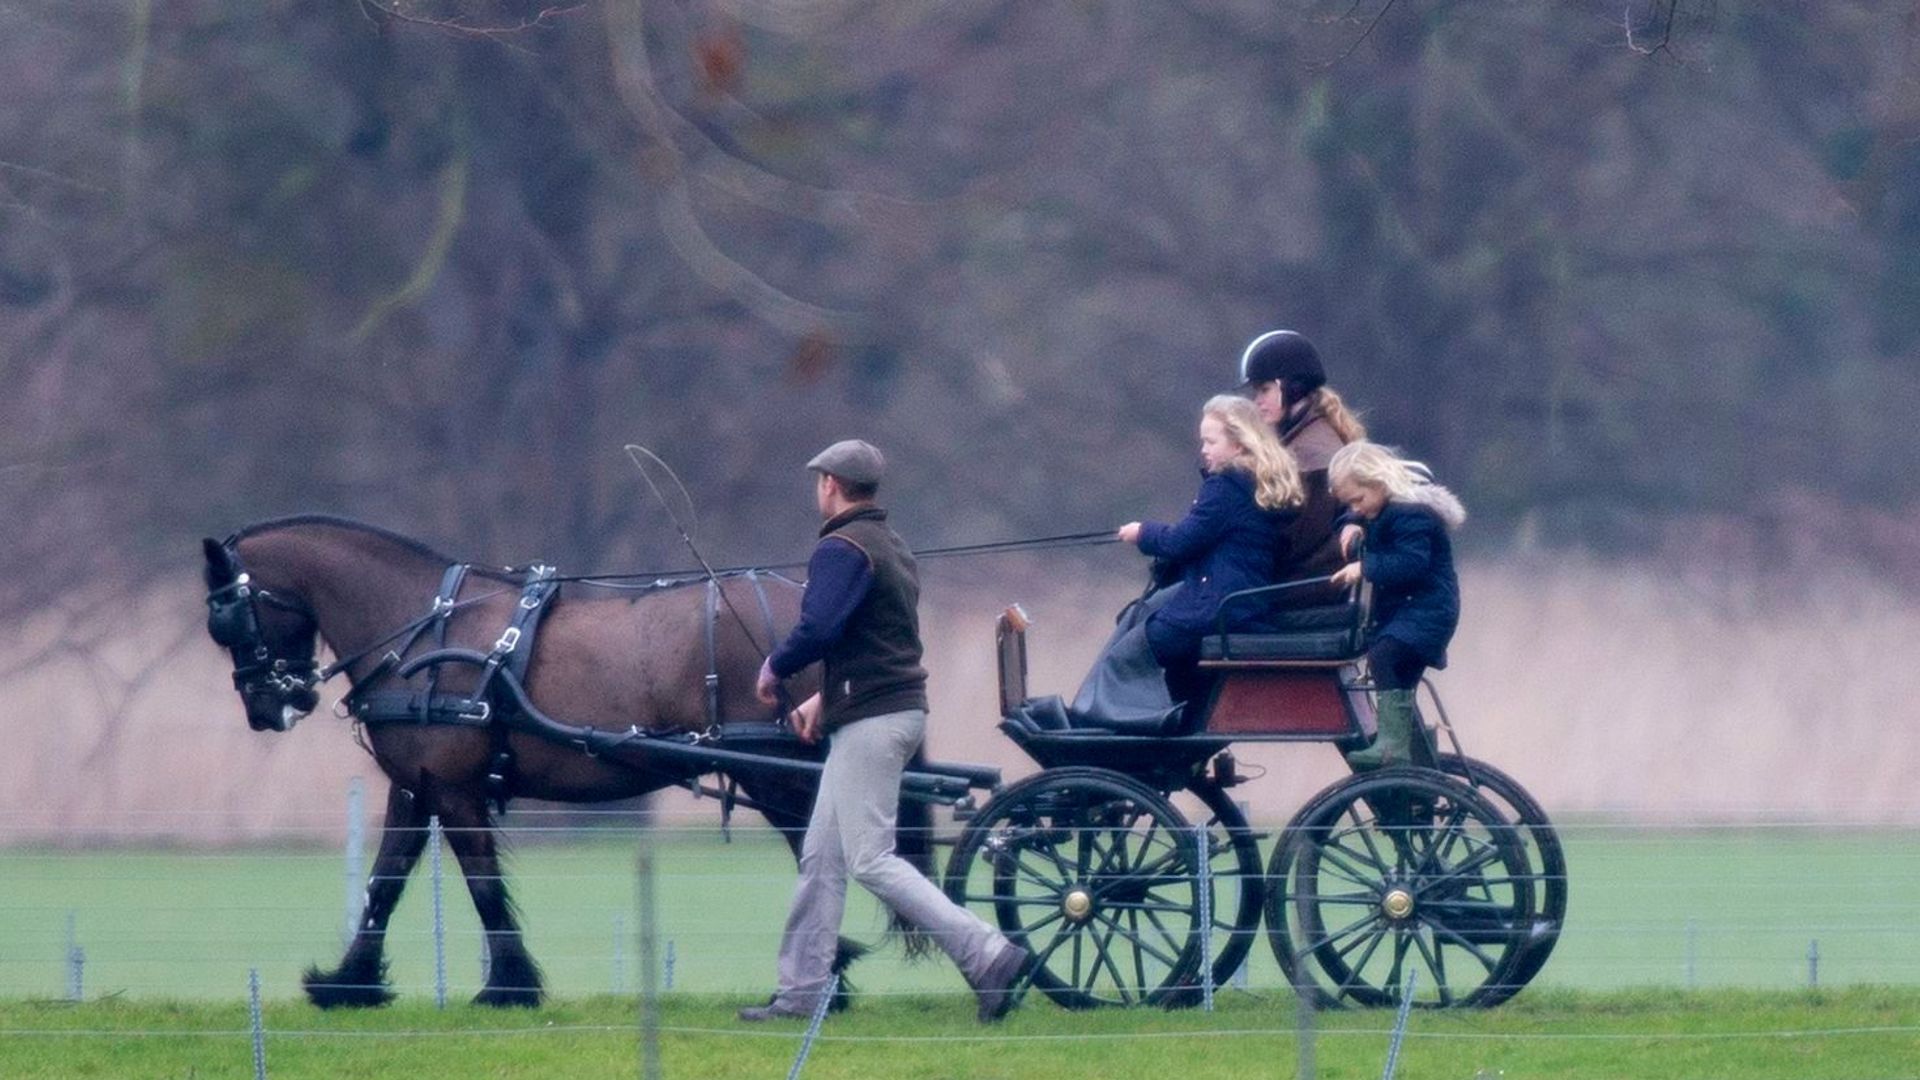 Lady Louise Windsor teaching Savannah and Isla Phillips how to drive a Carriage in Windsor Castle in 2018